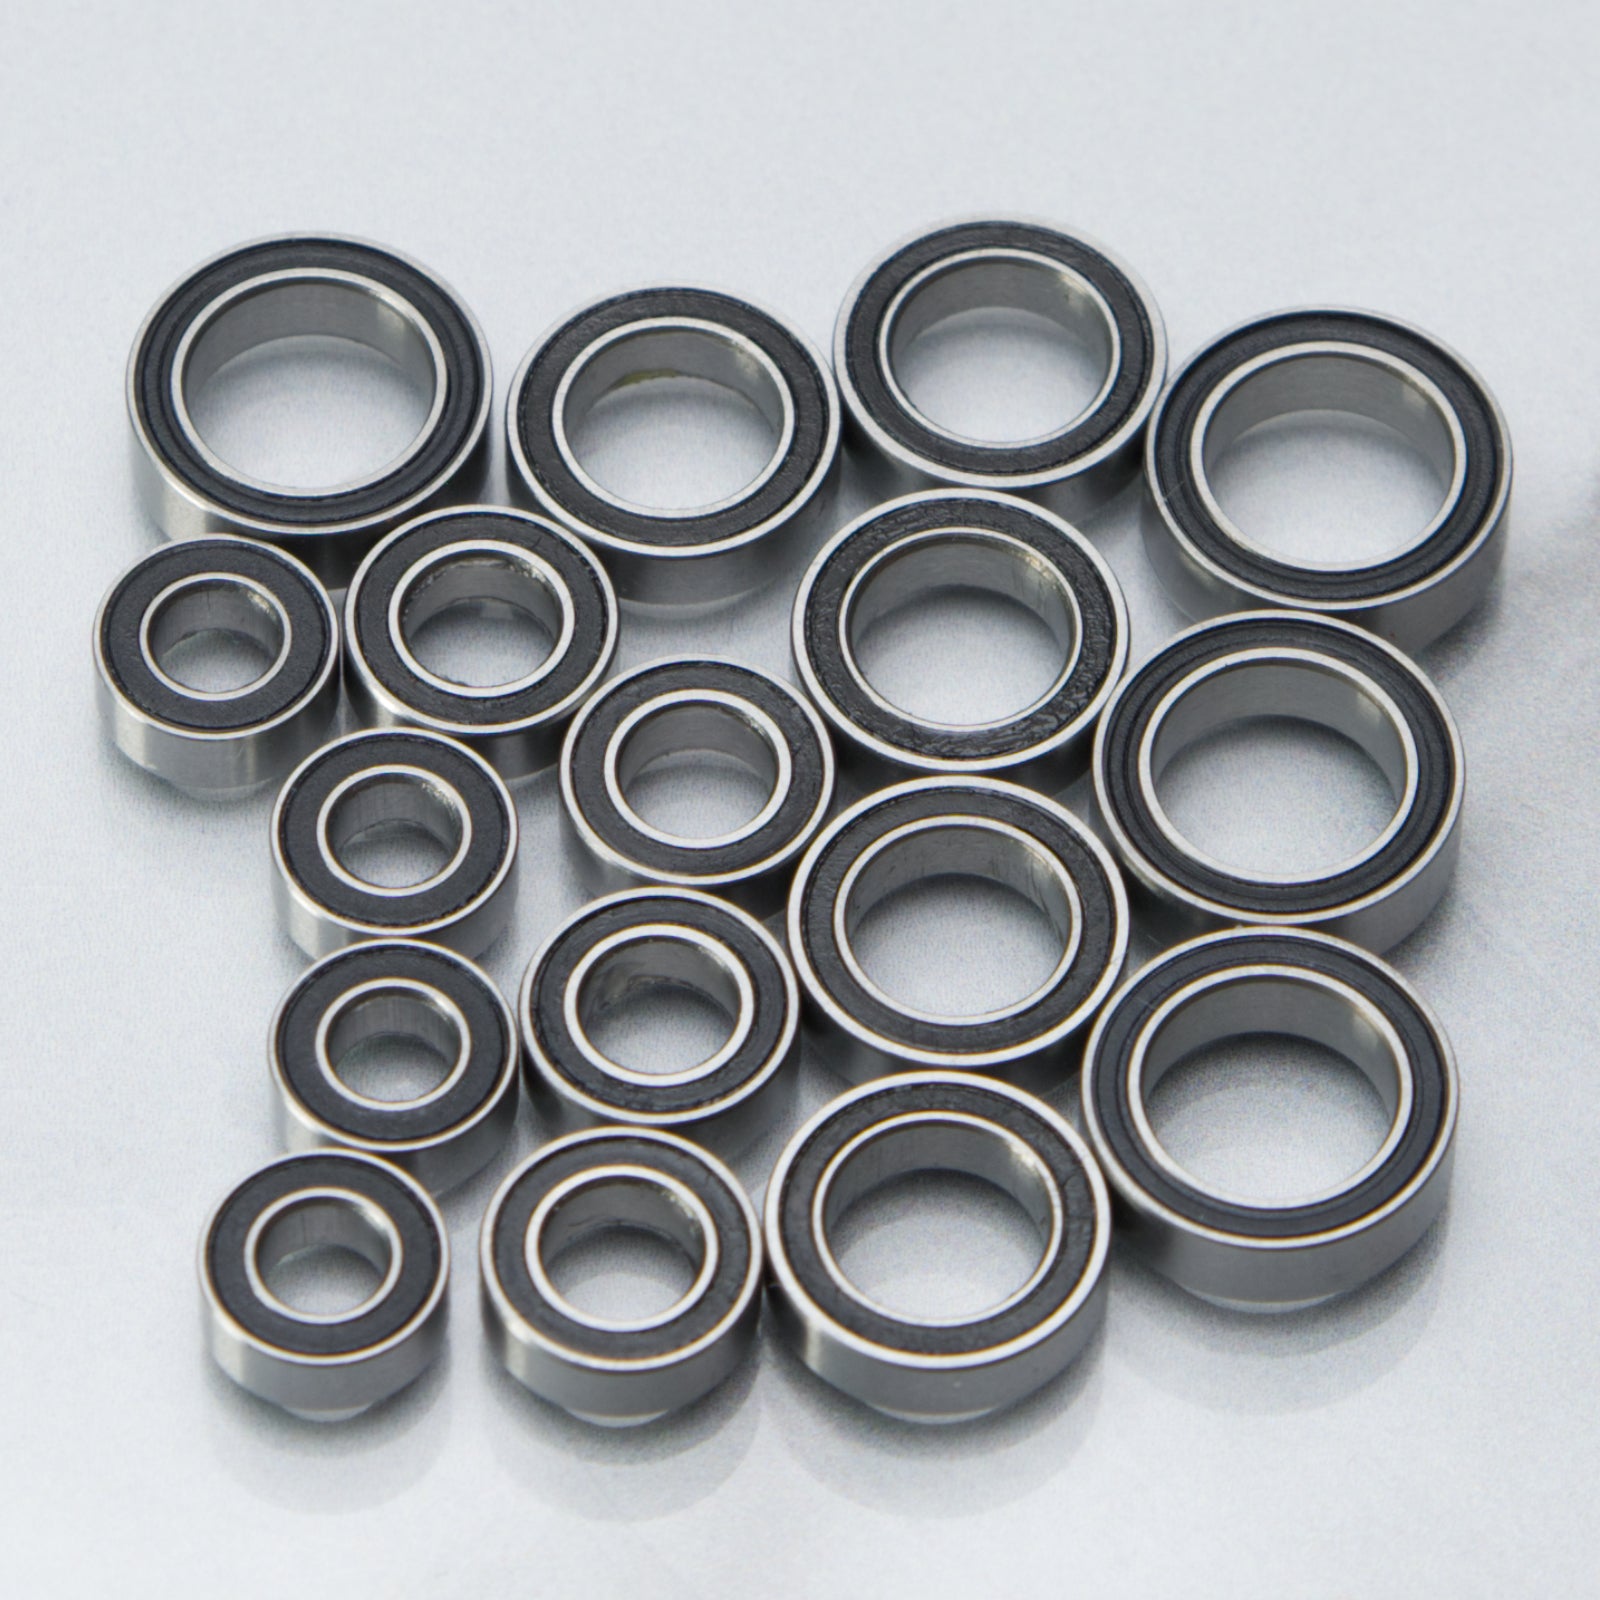 ECX 1/18 Roost 4WD, Ruckus, Torment 4WD SCT - Sealed Bearing Kit